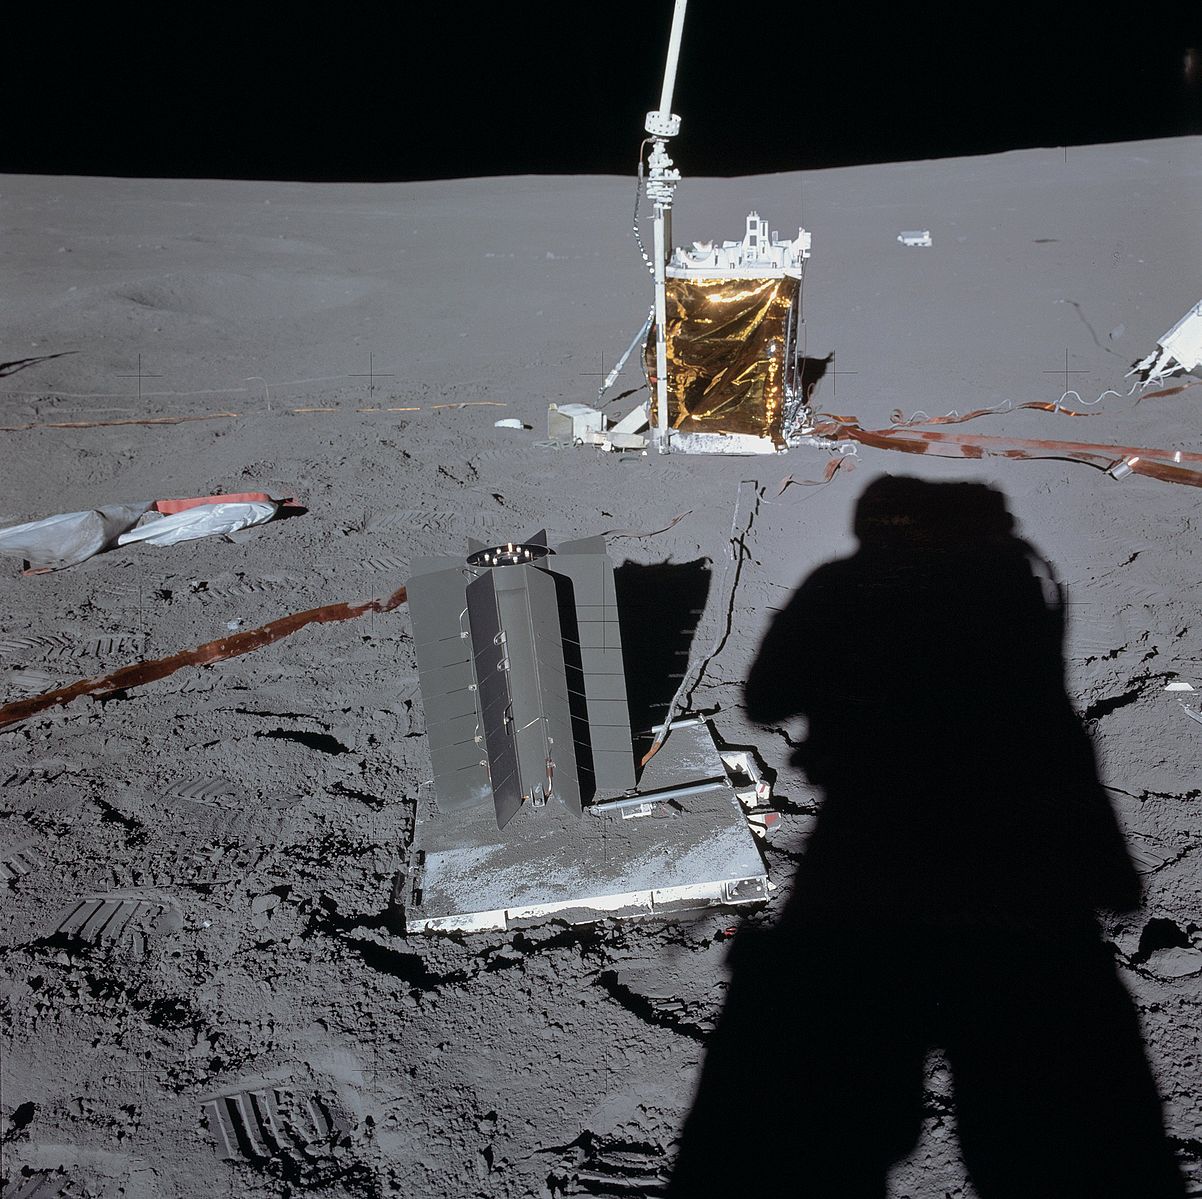 An astronaut casts a long shadow on the Moon as he photographs scientific equipment on the lunar surface.